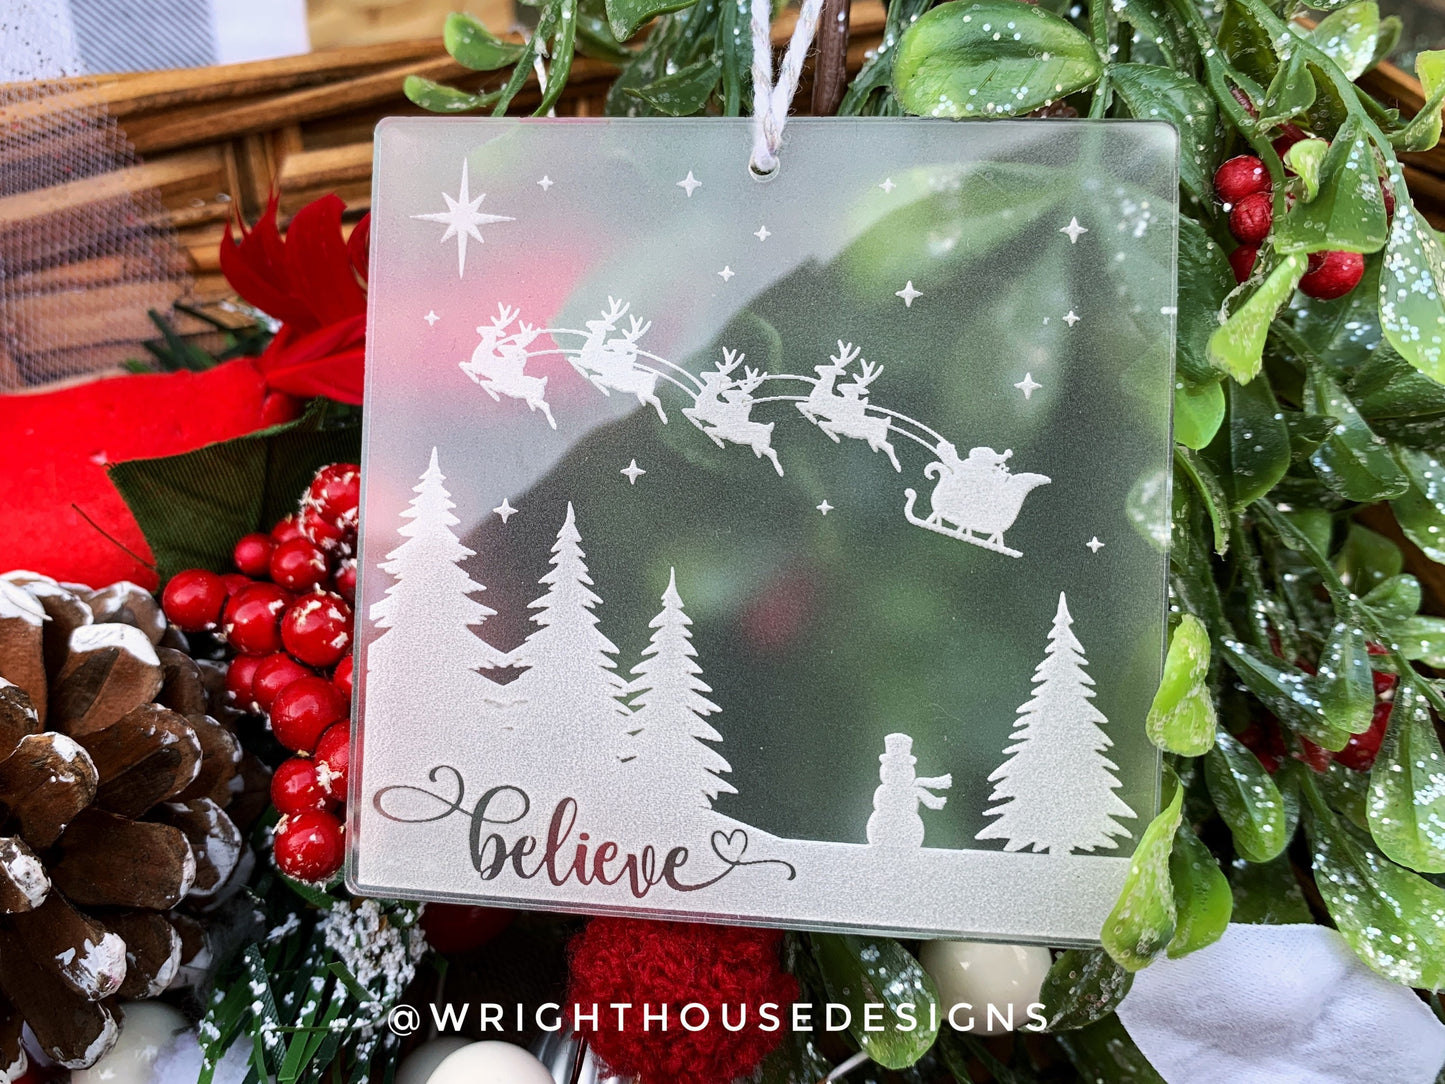 Believe - Santa's Sleigh Christmas Eve Scene - Laser Engraved Frosted Acrylic - Christmas Tree Ornament